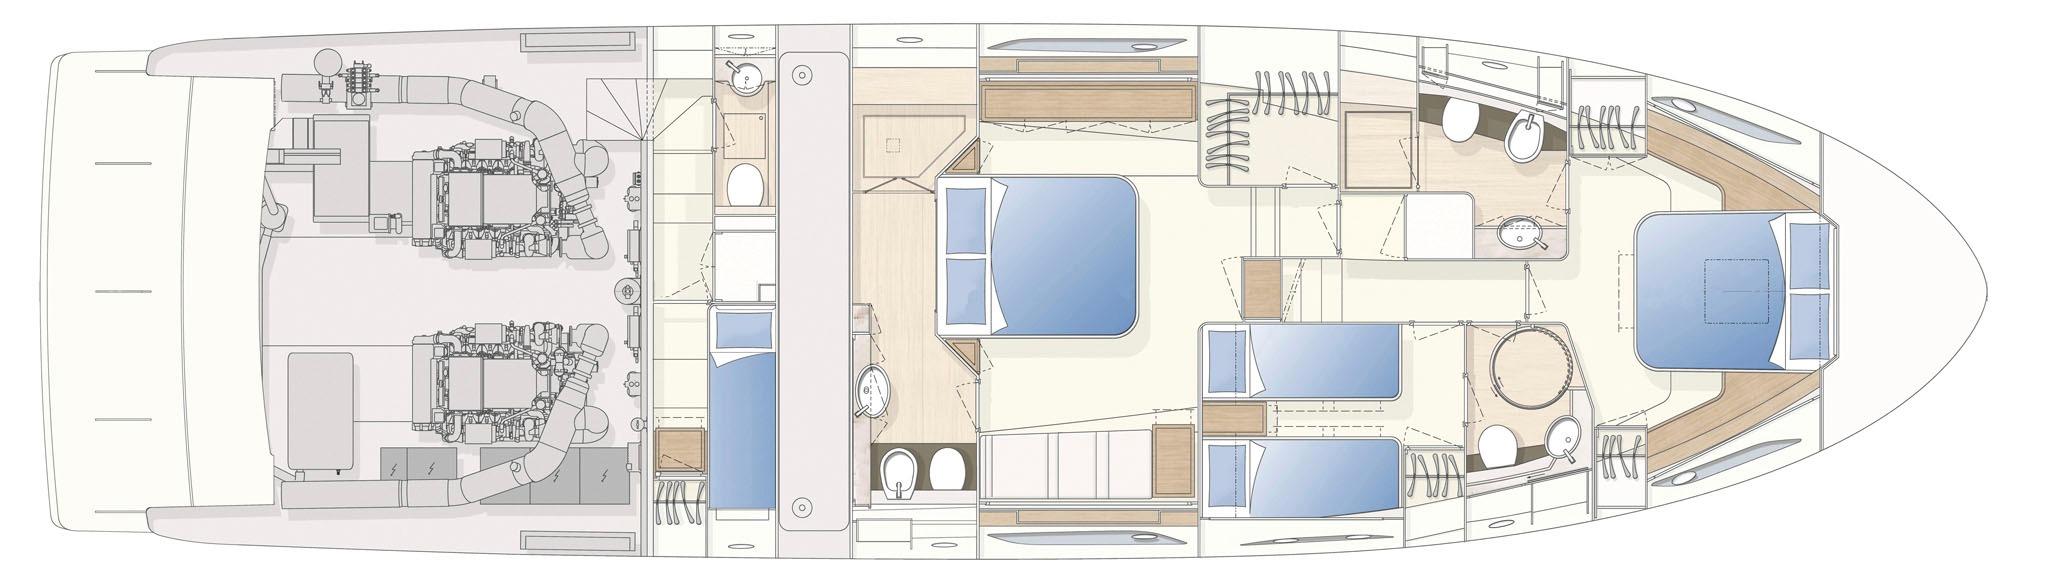 Manufacturer Provided Image: Ferretti 650 Lower Deck Layout Plan